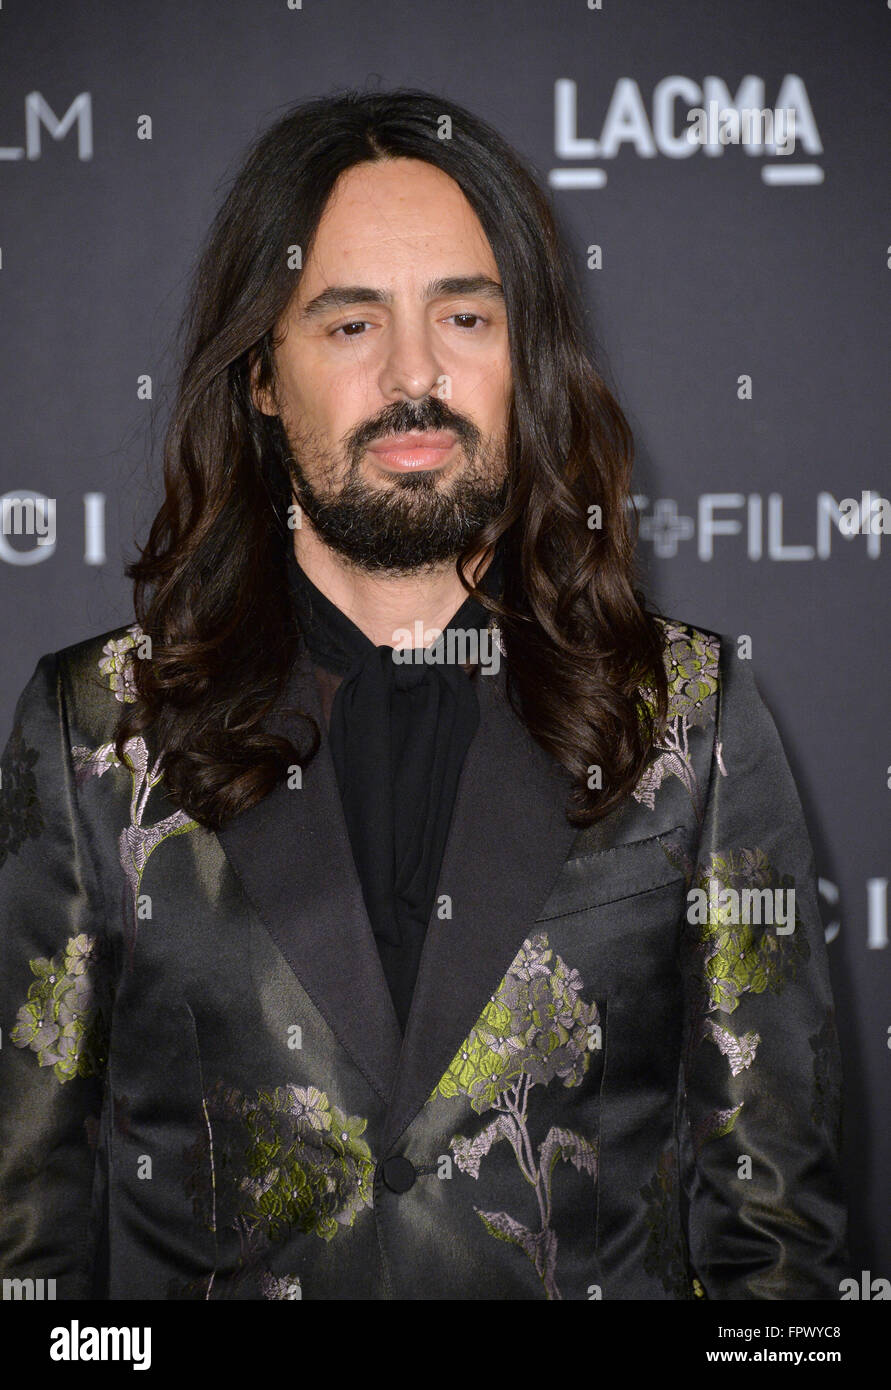 En del maskulinitet dyr LOS ANGELES, CA - NOVEMBER 7, 2015: Alessandro Michele, Gucci creative  director, at the 2015 LACMA Art+Film Gala at the Los Angeles County Museum  of Art Stock Photo - Alamy